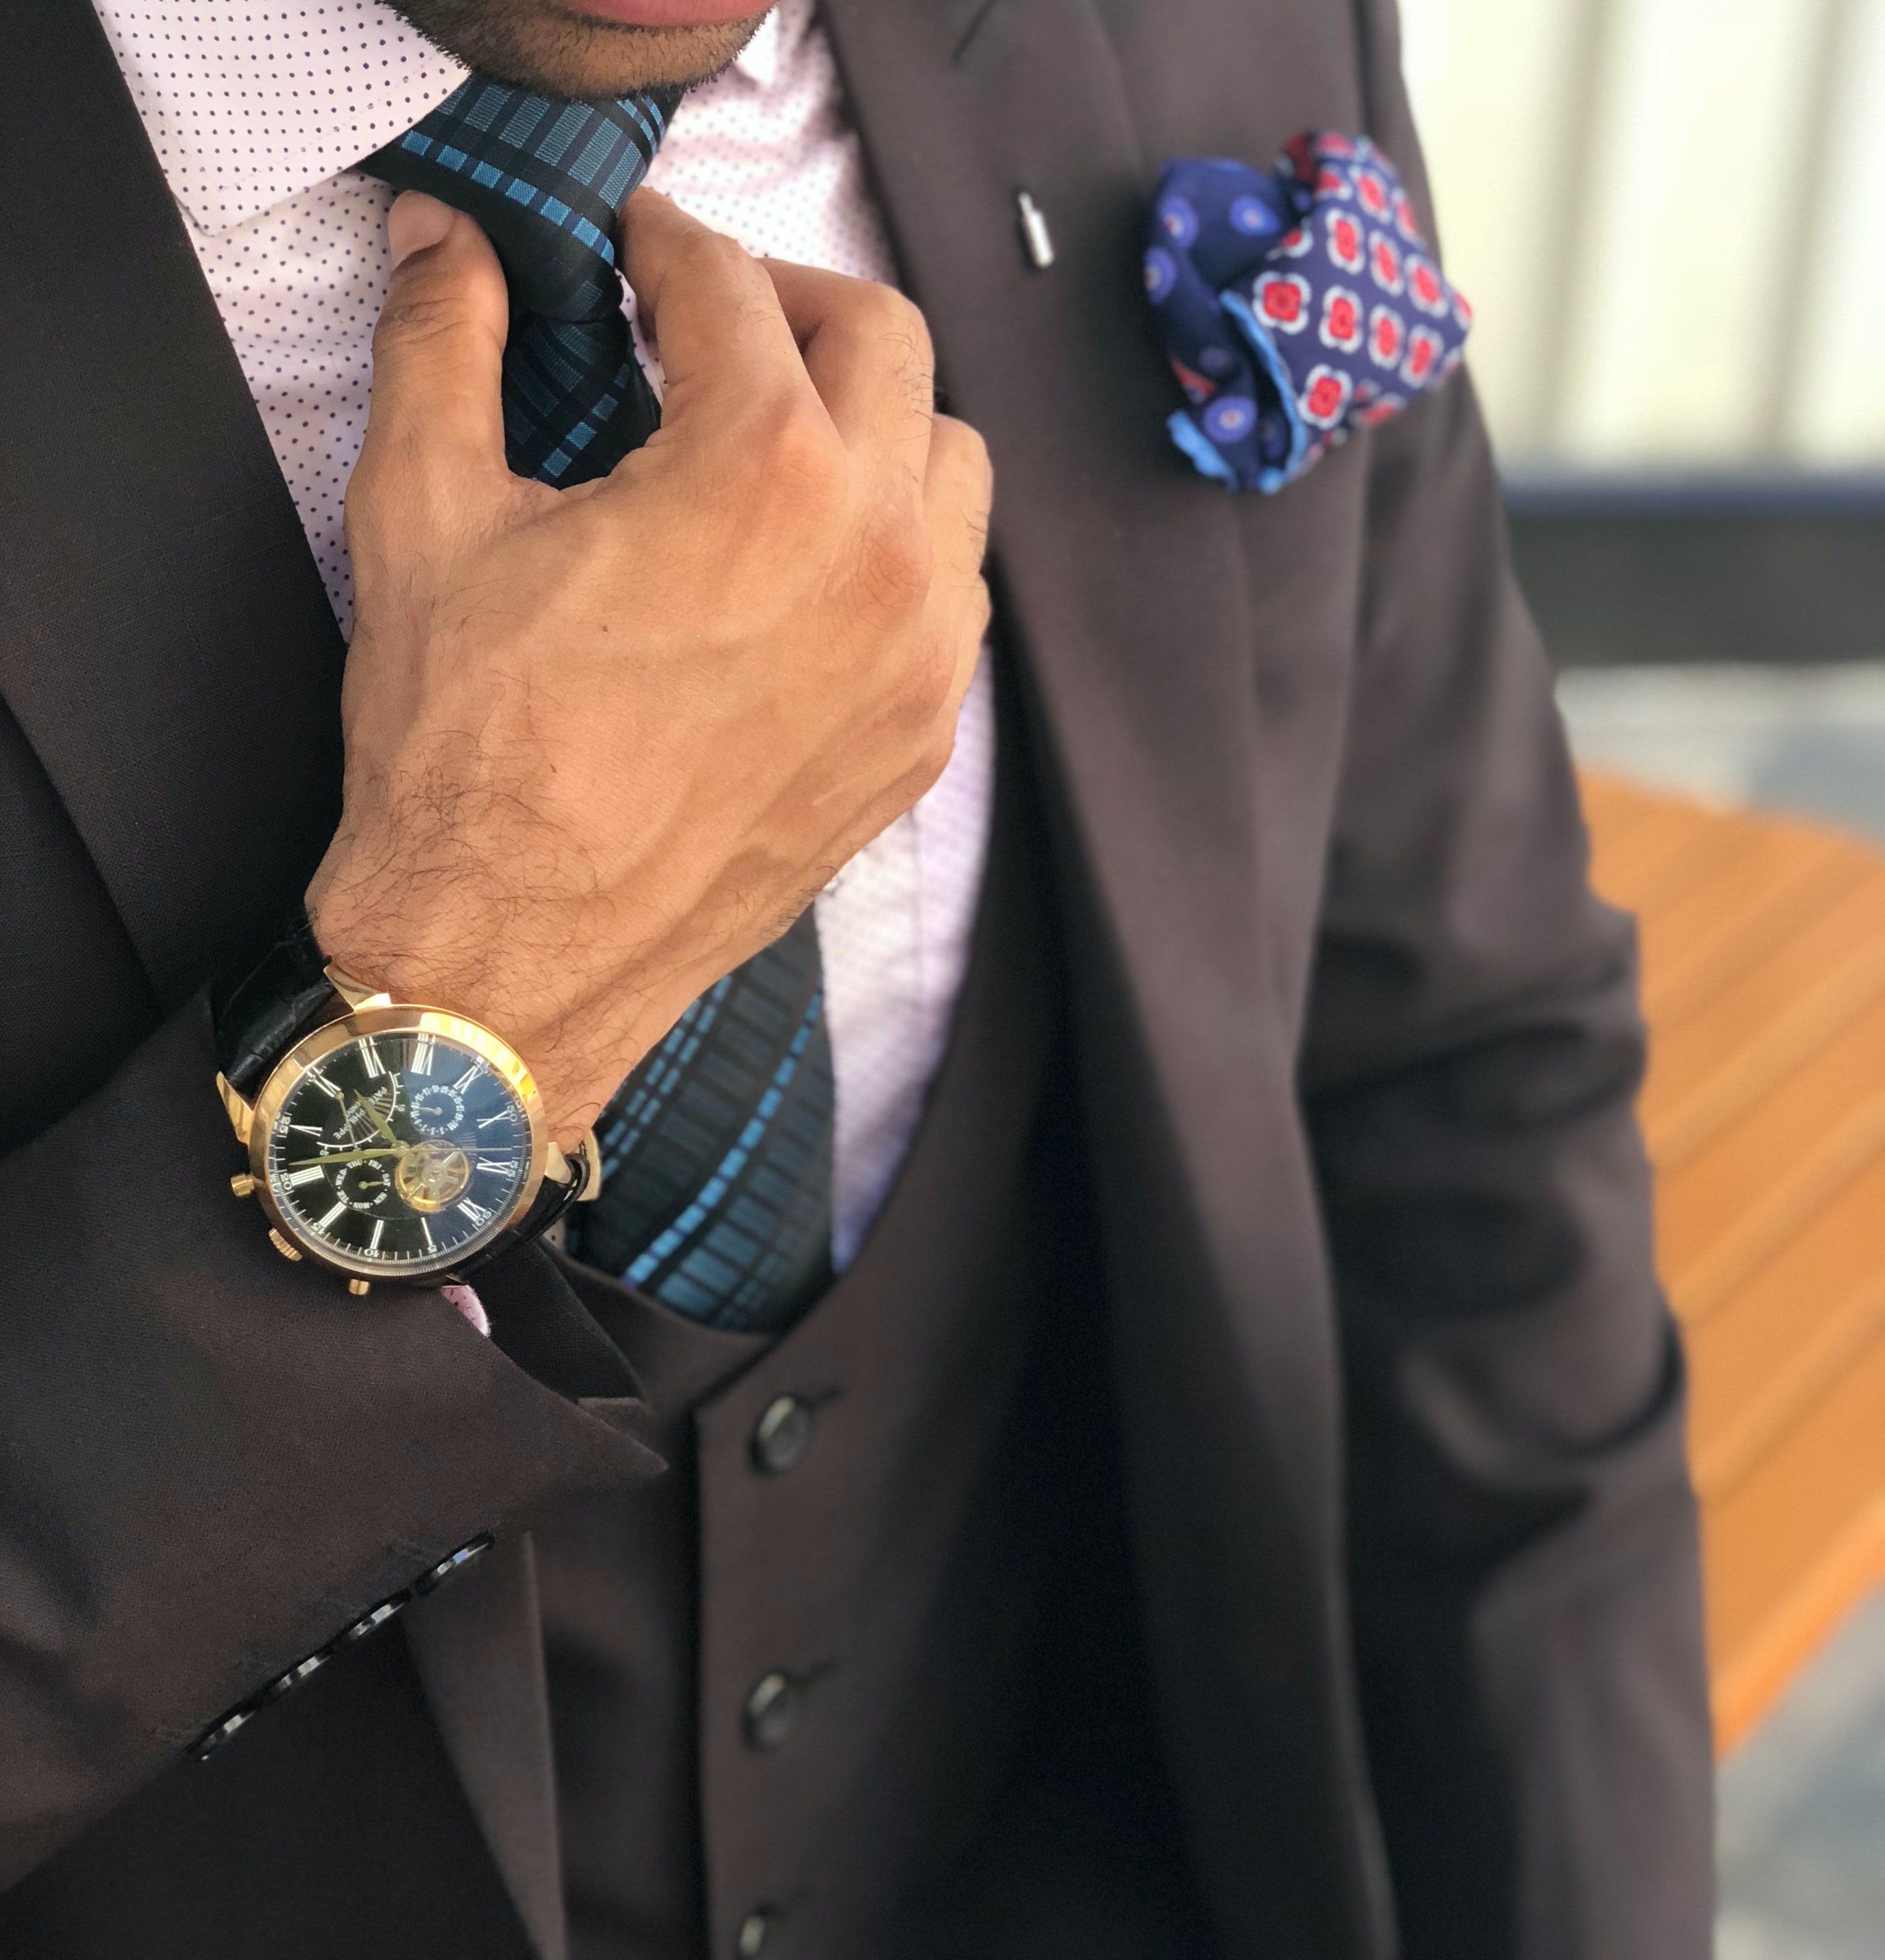 Why Should You Choose Custom Made Suits?